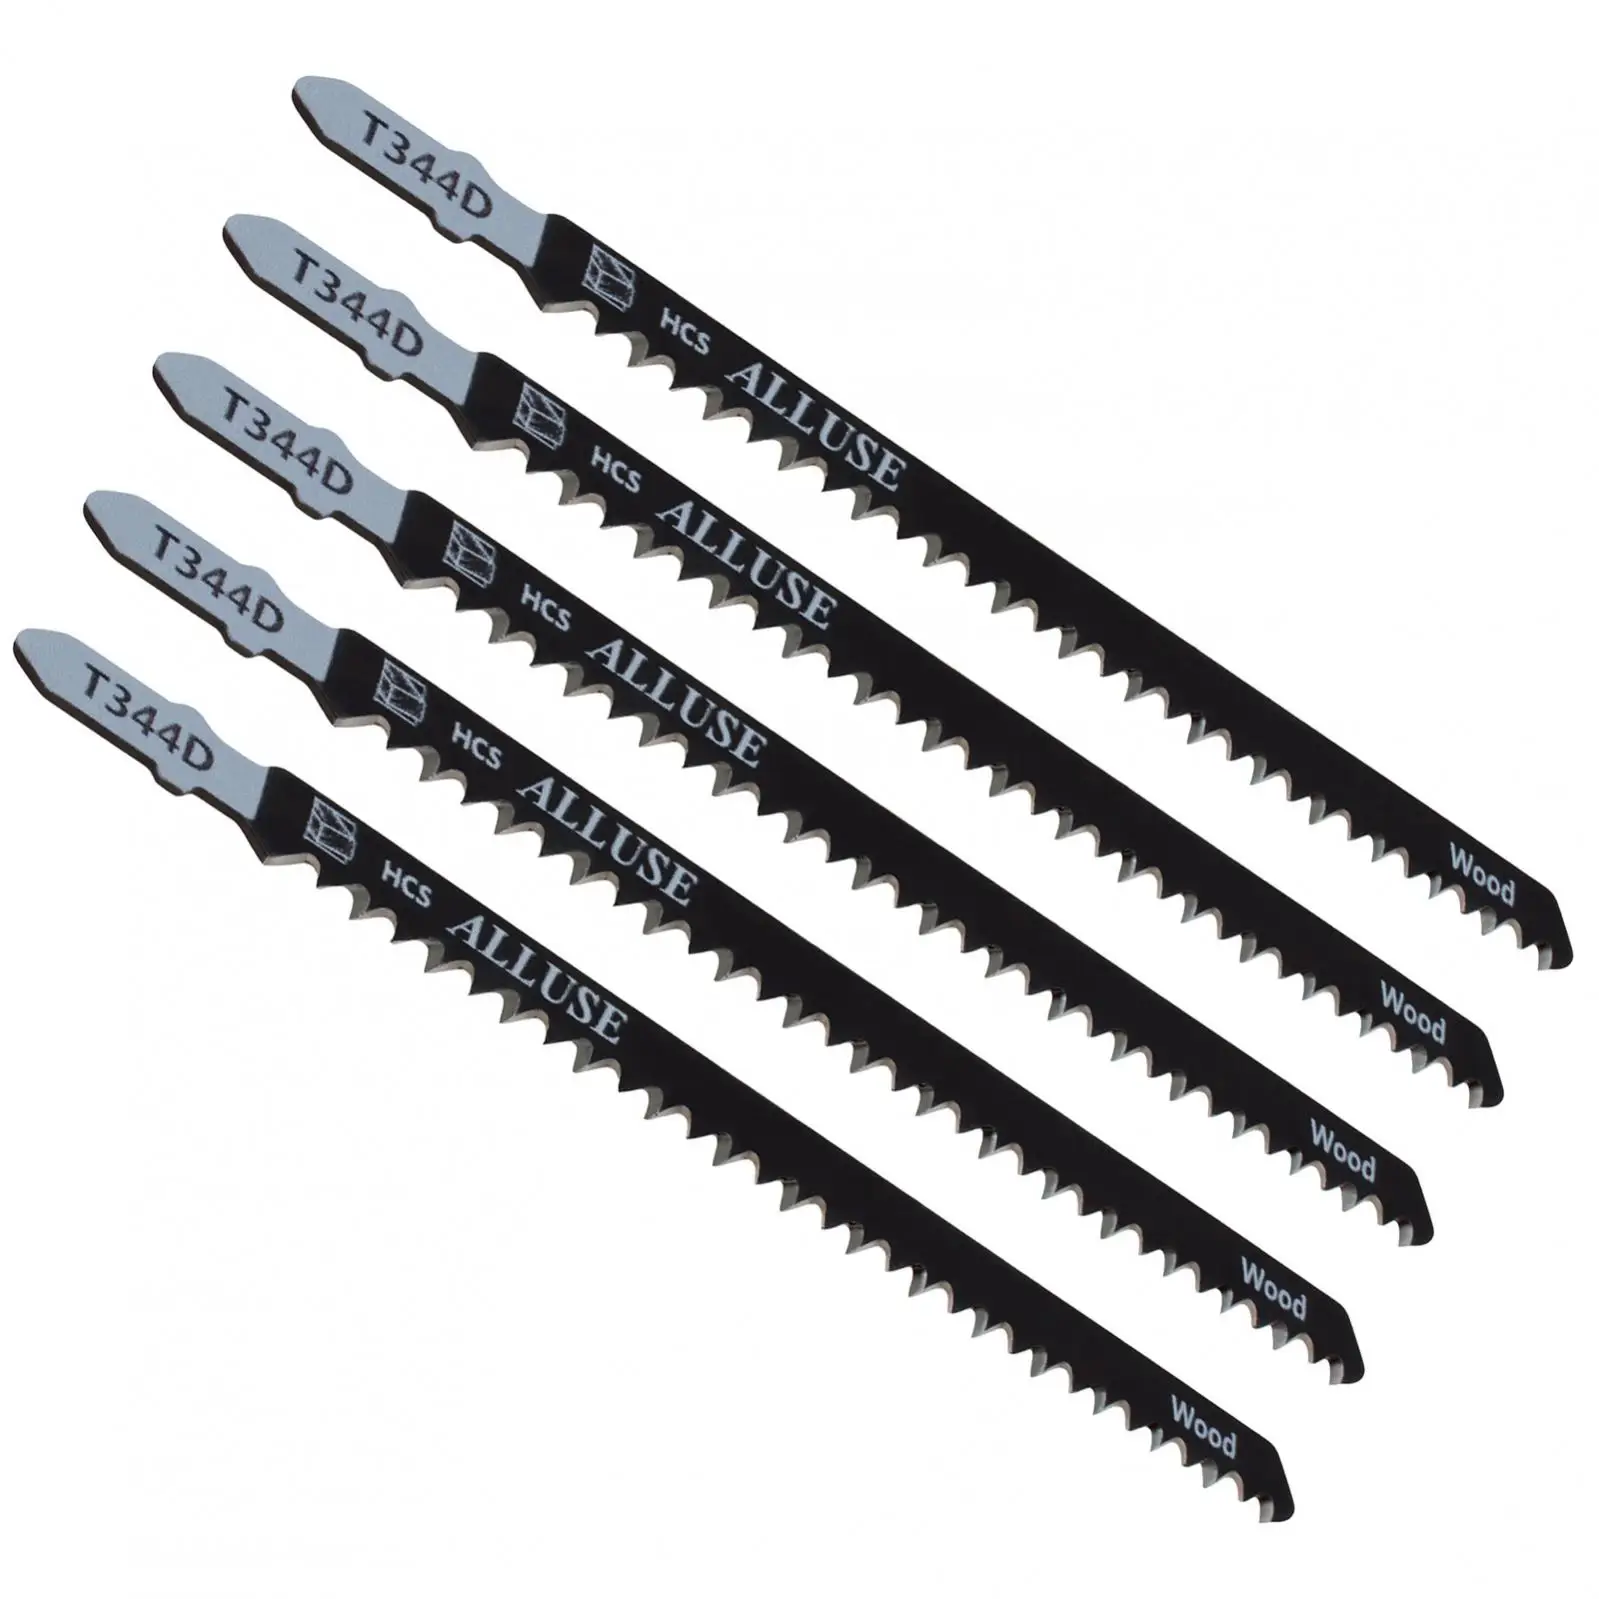 5pcs/set High-carbon Steel Reciprocating Saw Blades  T344D 150mm Straight Cutting Jig Saw for Woodworking Tools / Plastic PVC 3 saw cordless reciprocating saw adapter blades electric drill modified attachment reciprocating saw jig ergonomic handle tools